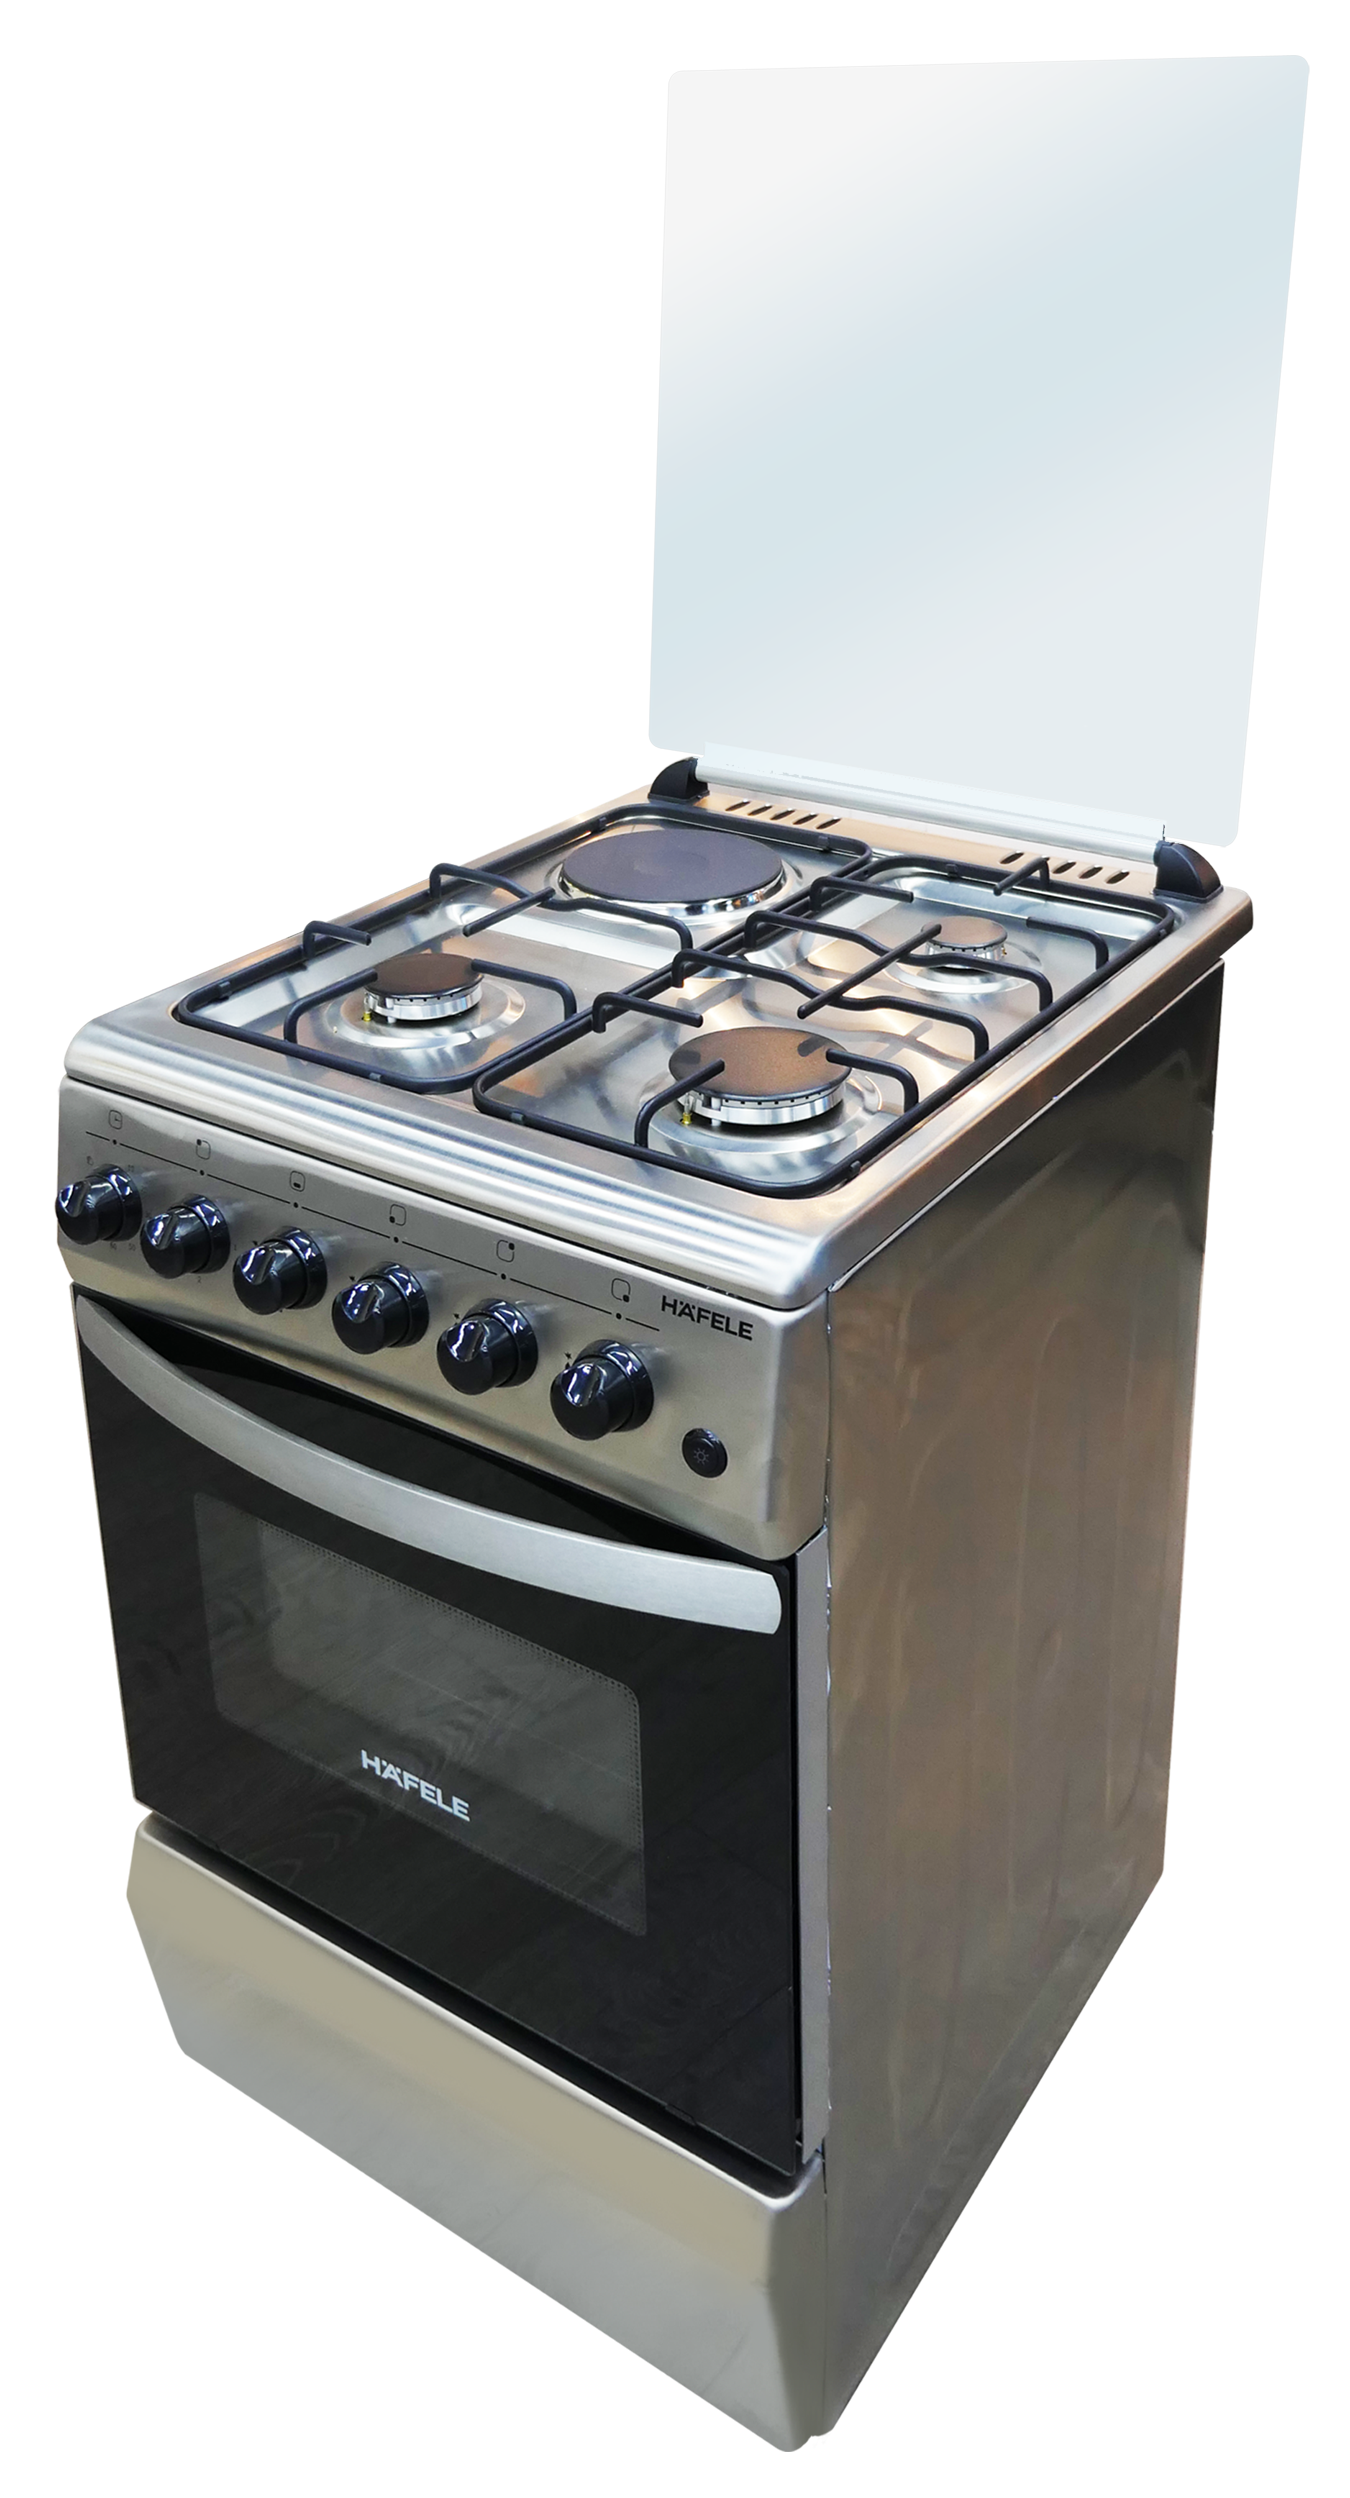 FREE STANDING 3-GAS/1-ELEC.HOTPLATE COOKER ST.ST 500 mm x 600 mm x 850 mm